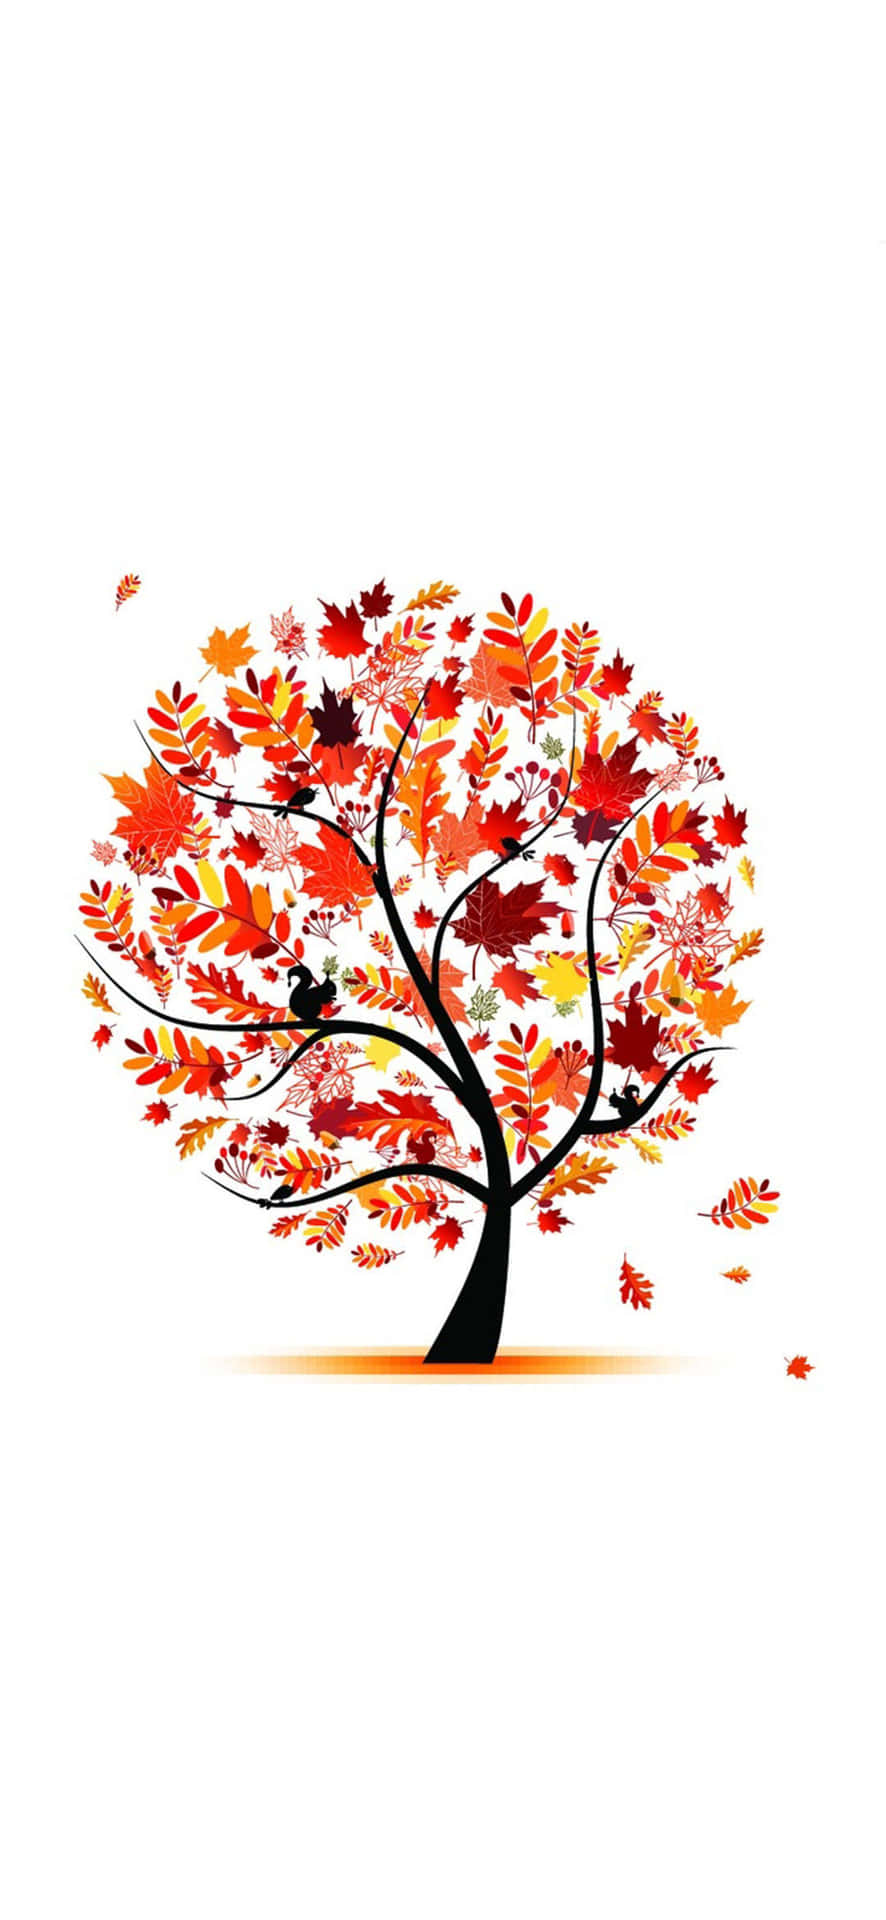 "Welcome the crisp colors and cool breeze of autumn with this charming wallpaper!" Wallpaper